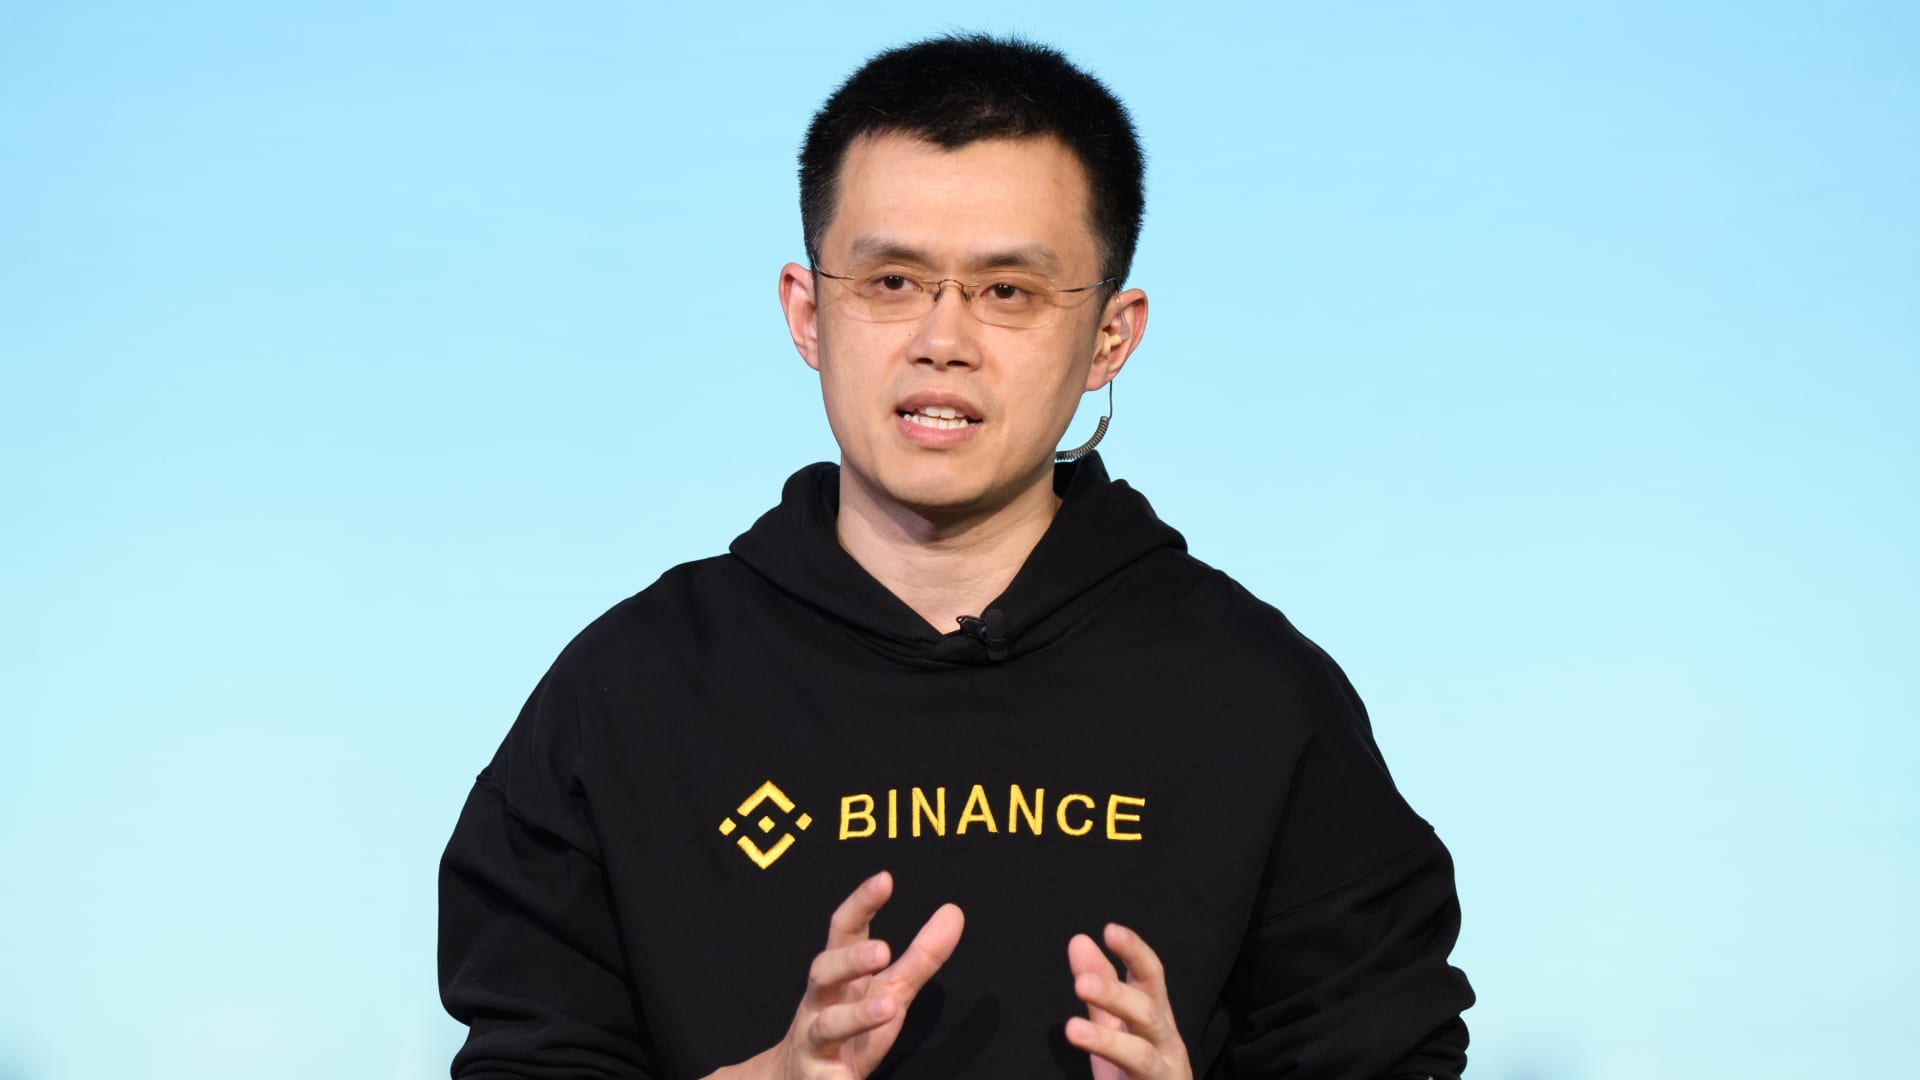 Crypto is banned in China, nonetheless Binance workers and reduction volunteers repeat of us straight forward systems to bypass the ban